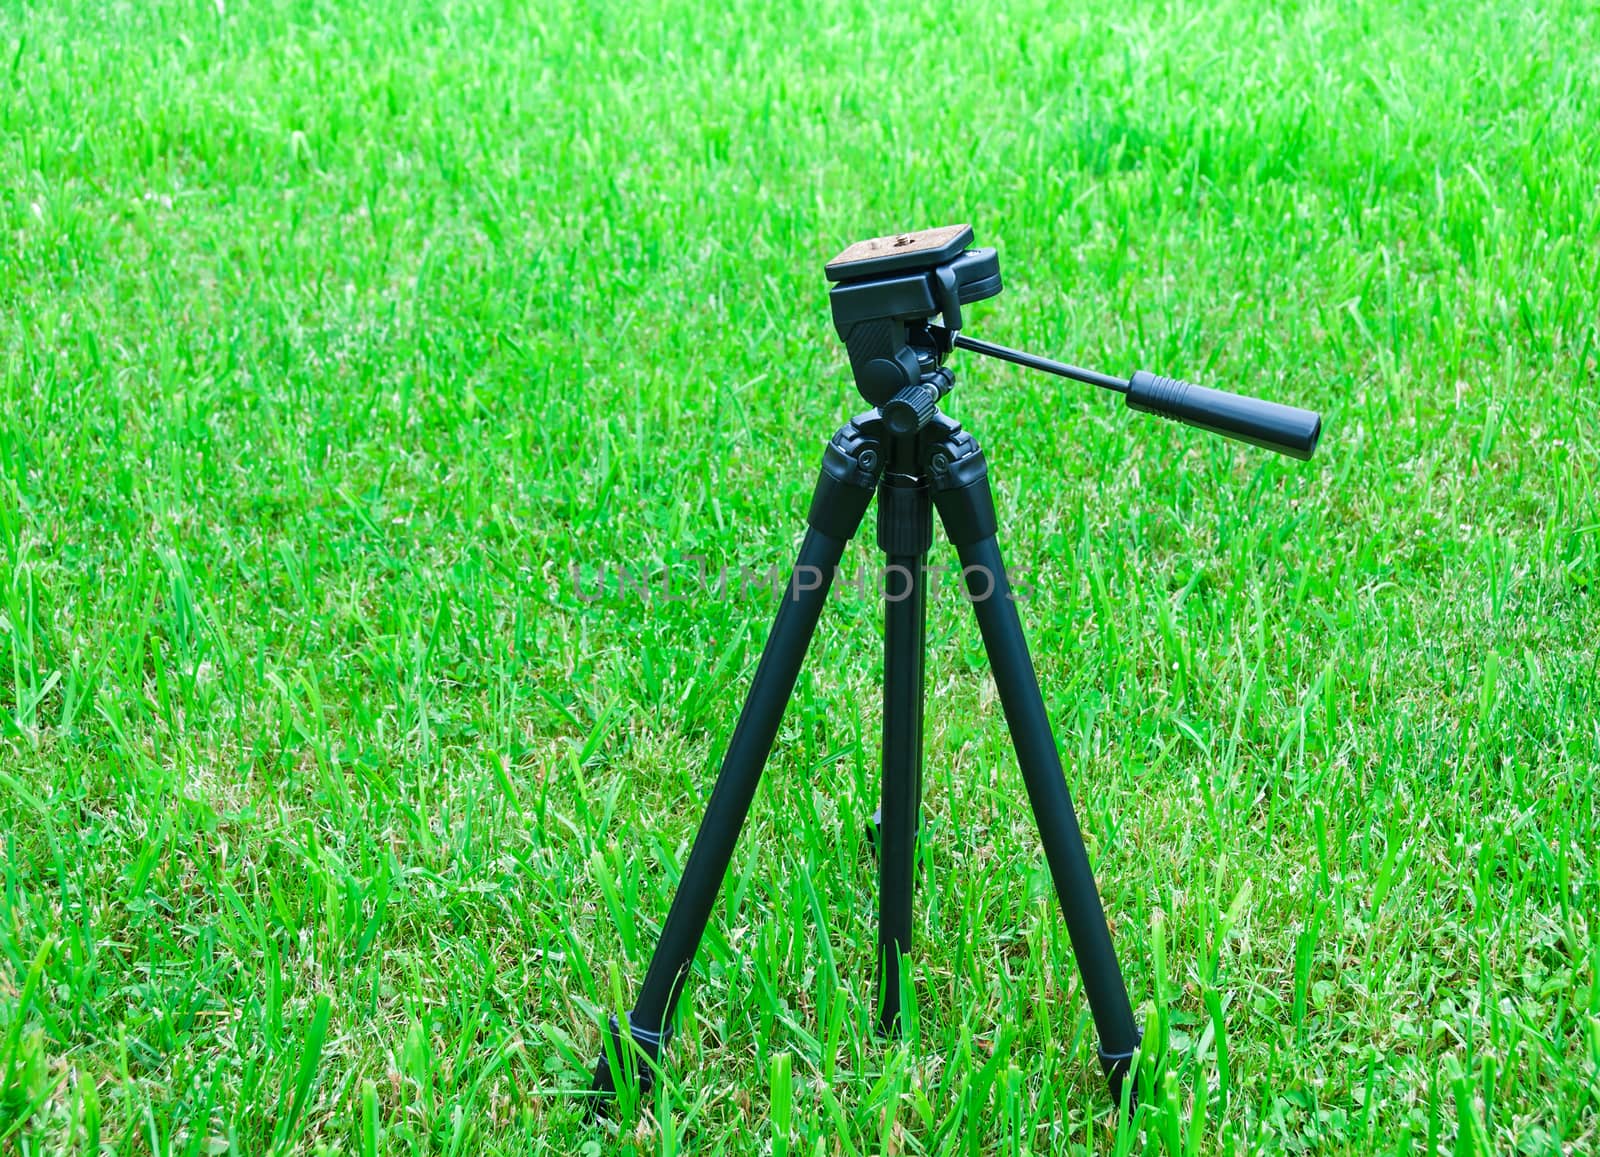 A tripod for the camera on natural background